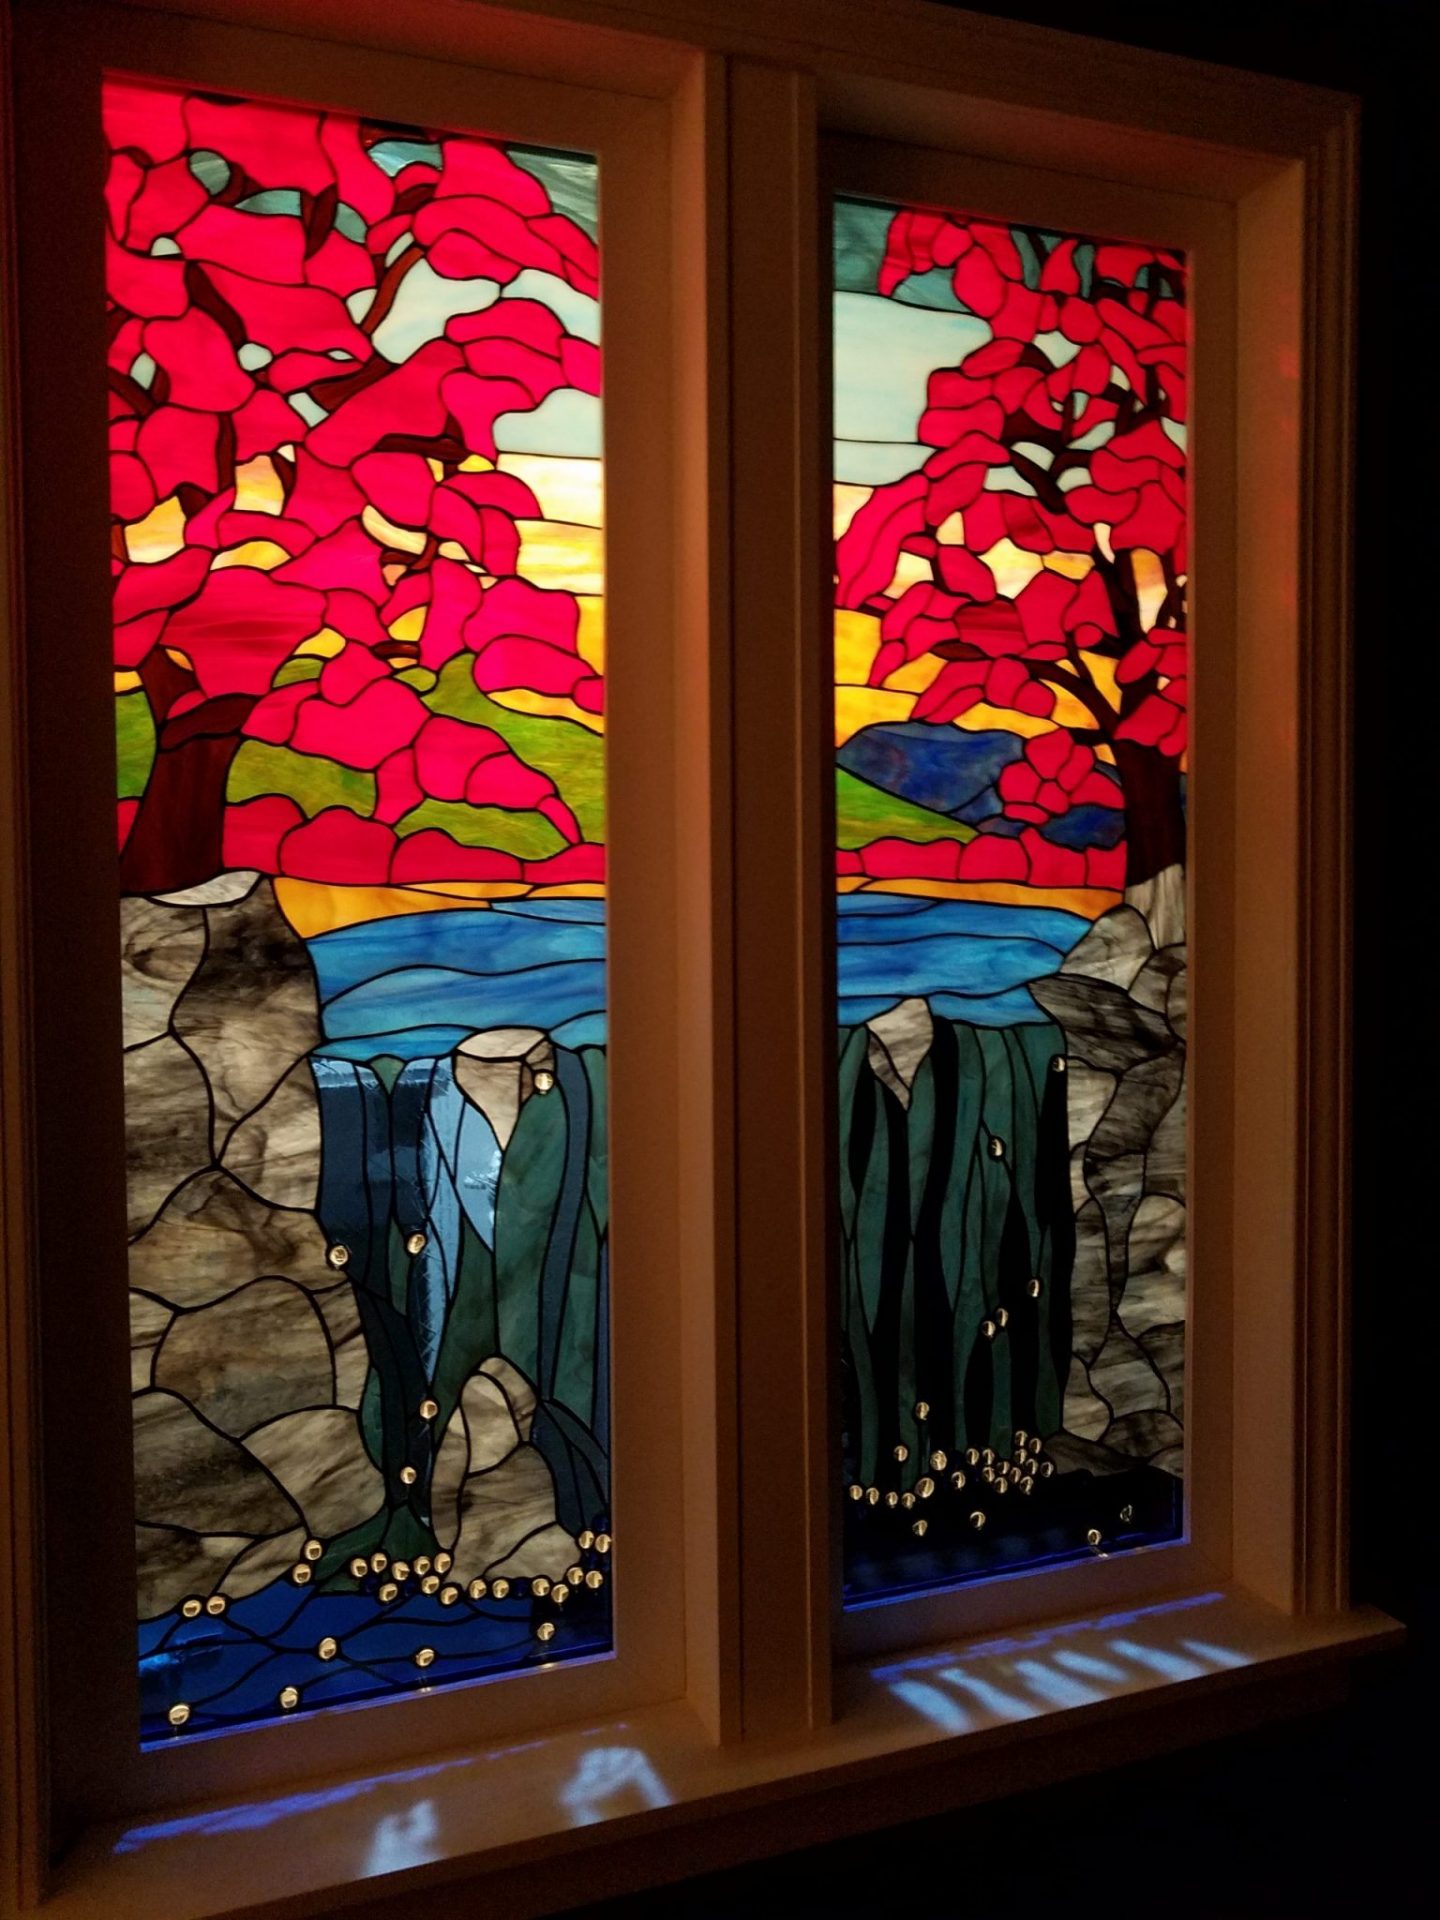 So Beautiful! Maple Tree & Waterfall Stained Glass Window Install In Entryway